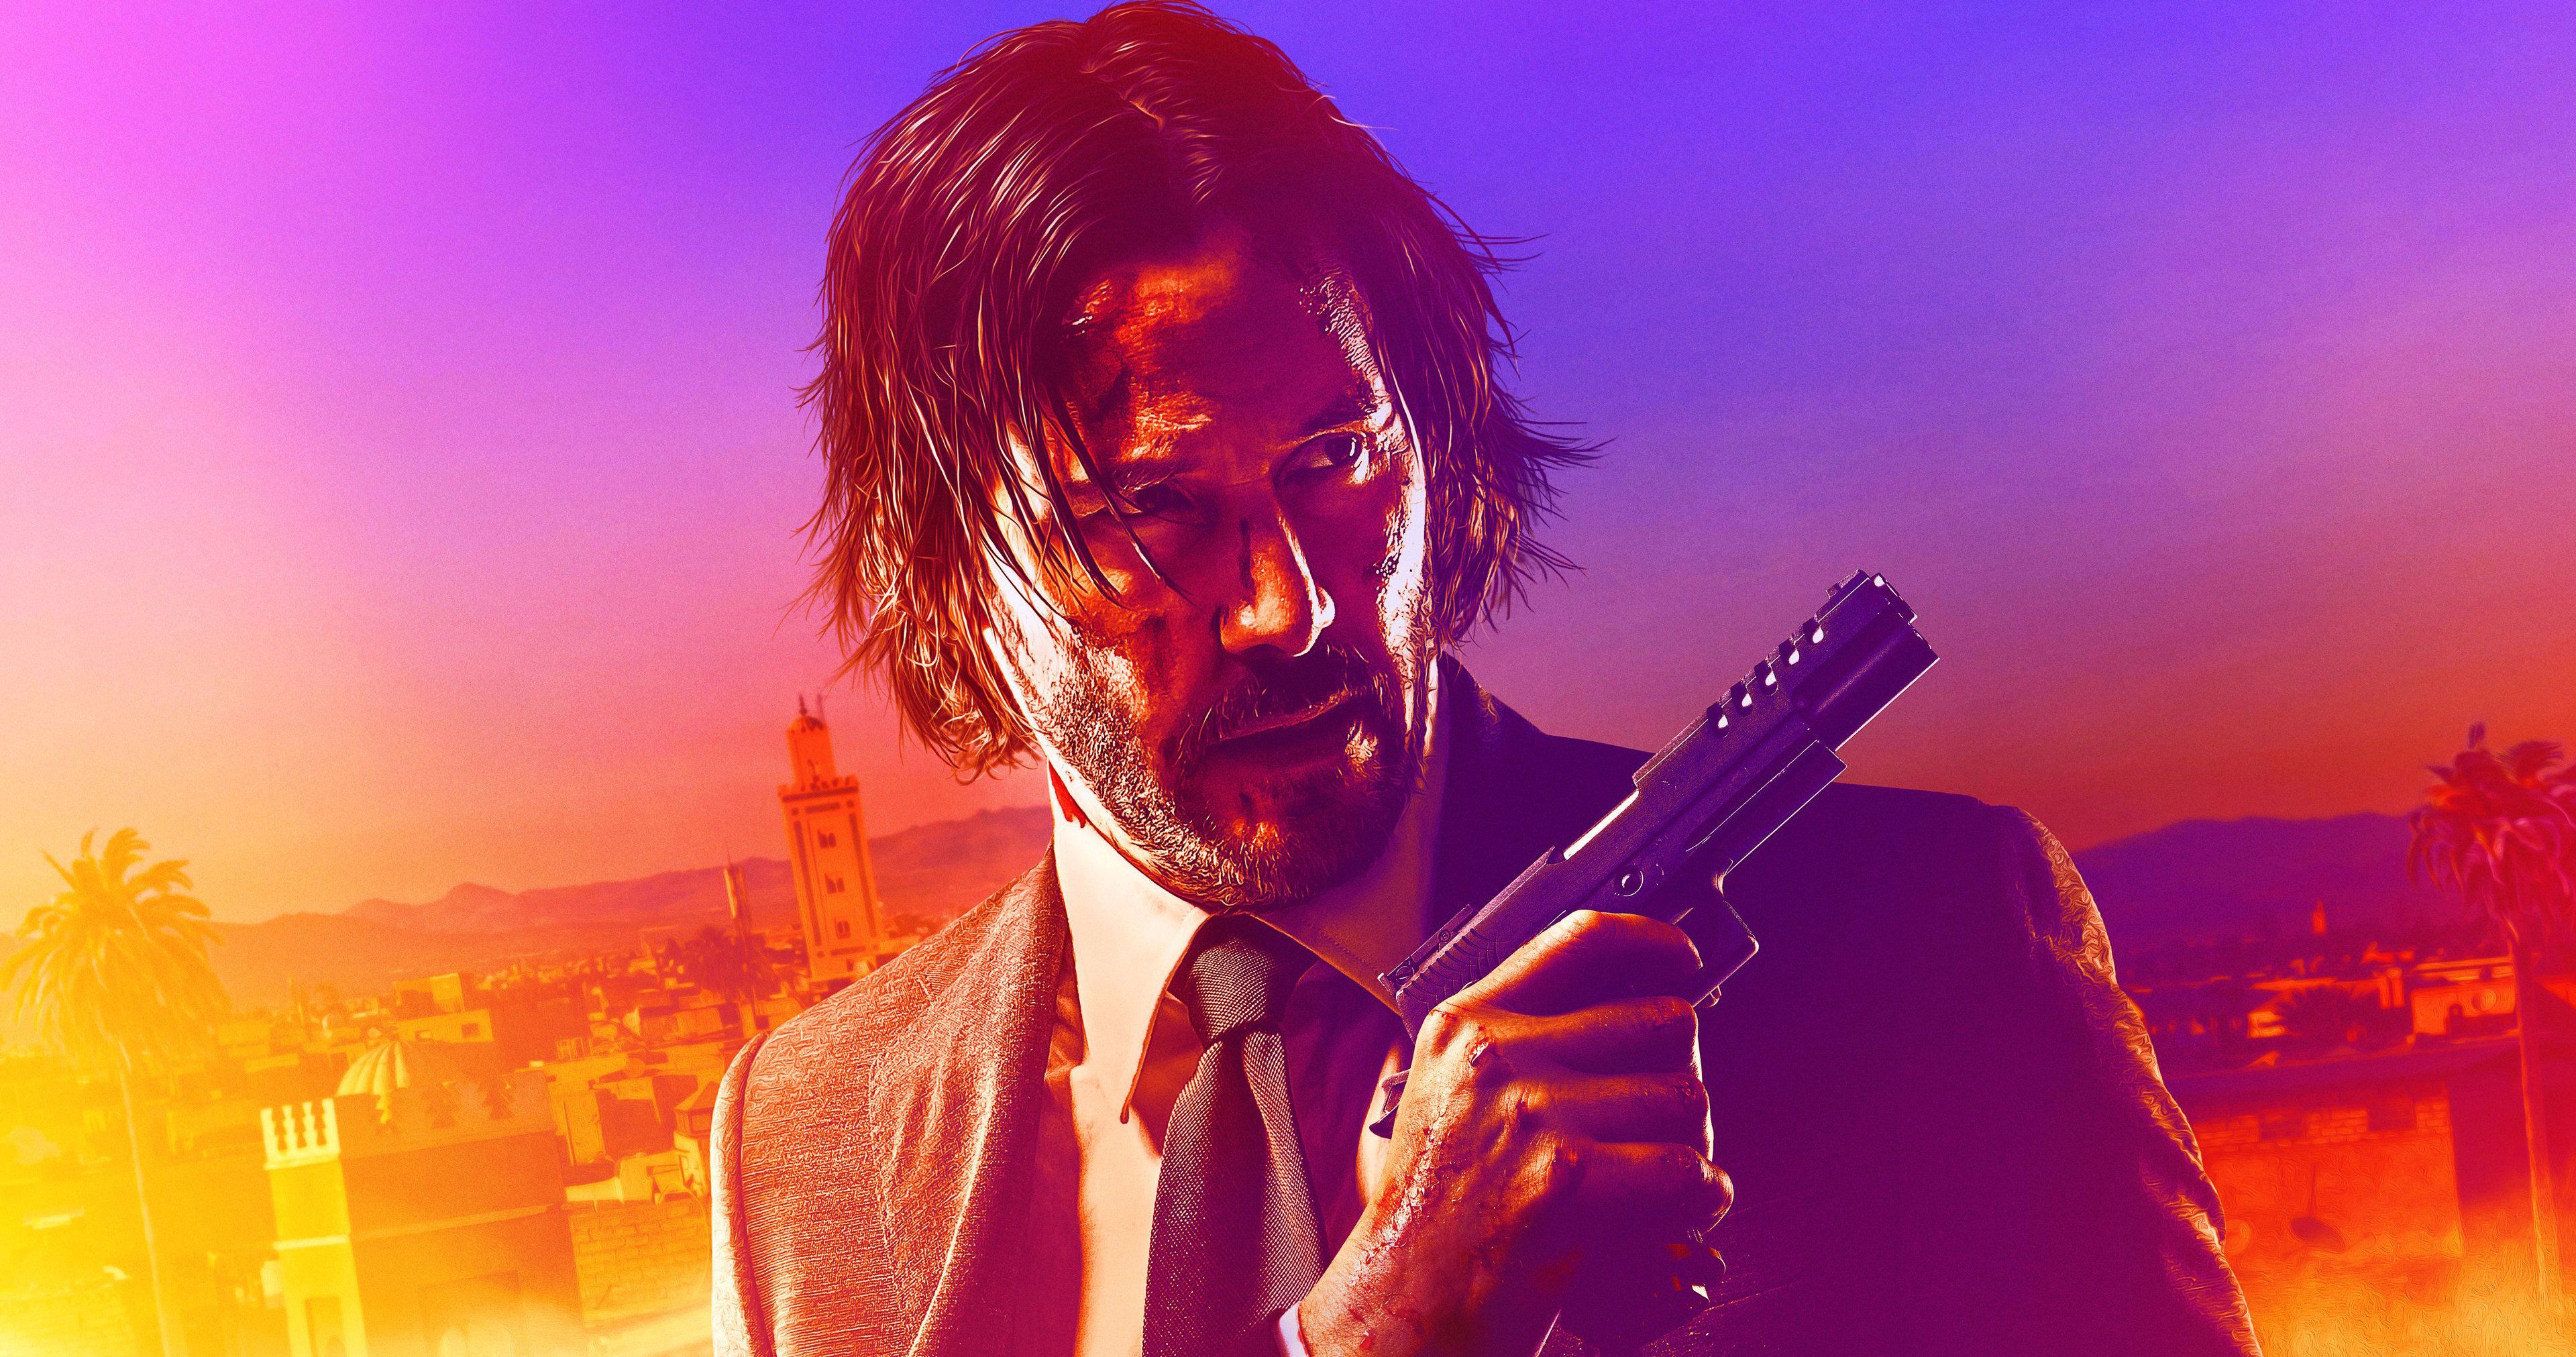 John Wick 4 Needs a Solid Story Before the Director Can Start Thinking About John Wick 5